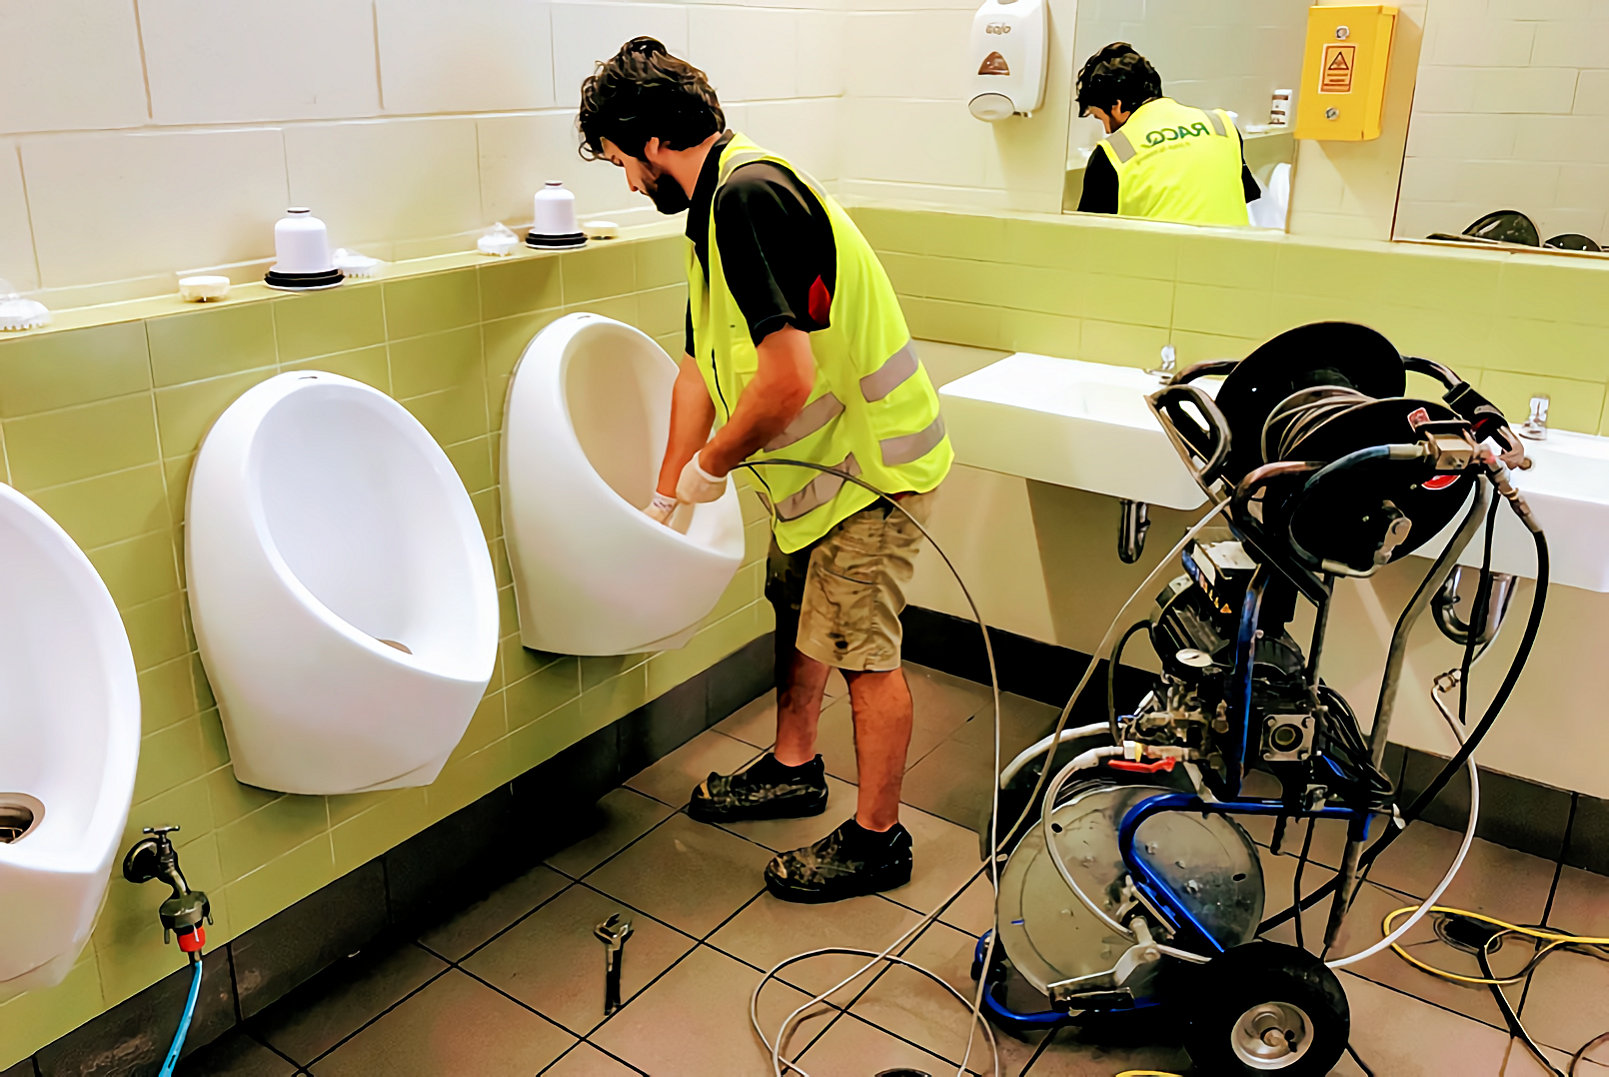 ZF201 ZeroFlush waterless urinals at Pat Rafter Arena being serviced by Whywait Plumbing